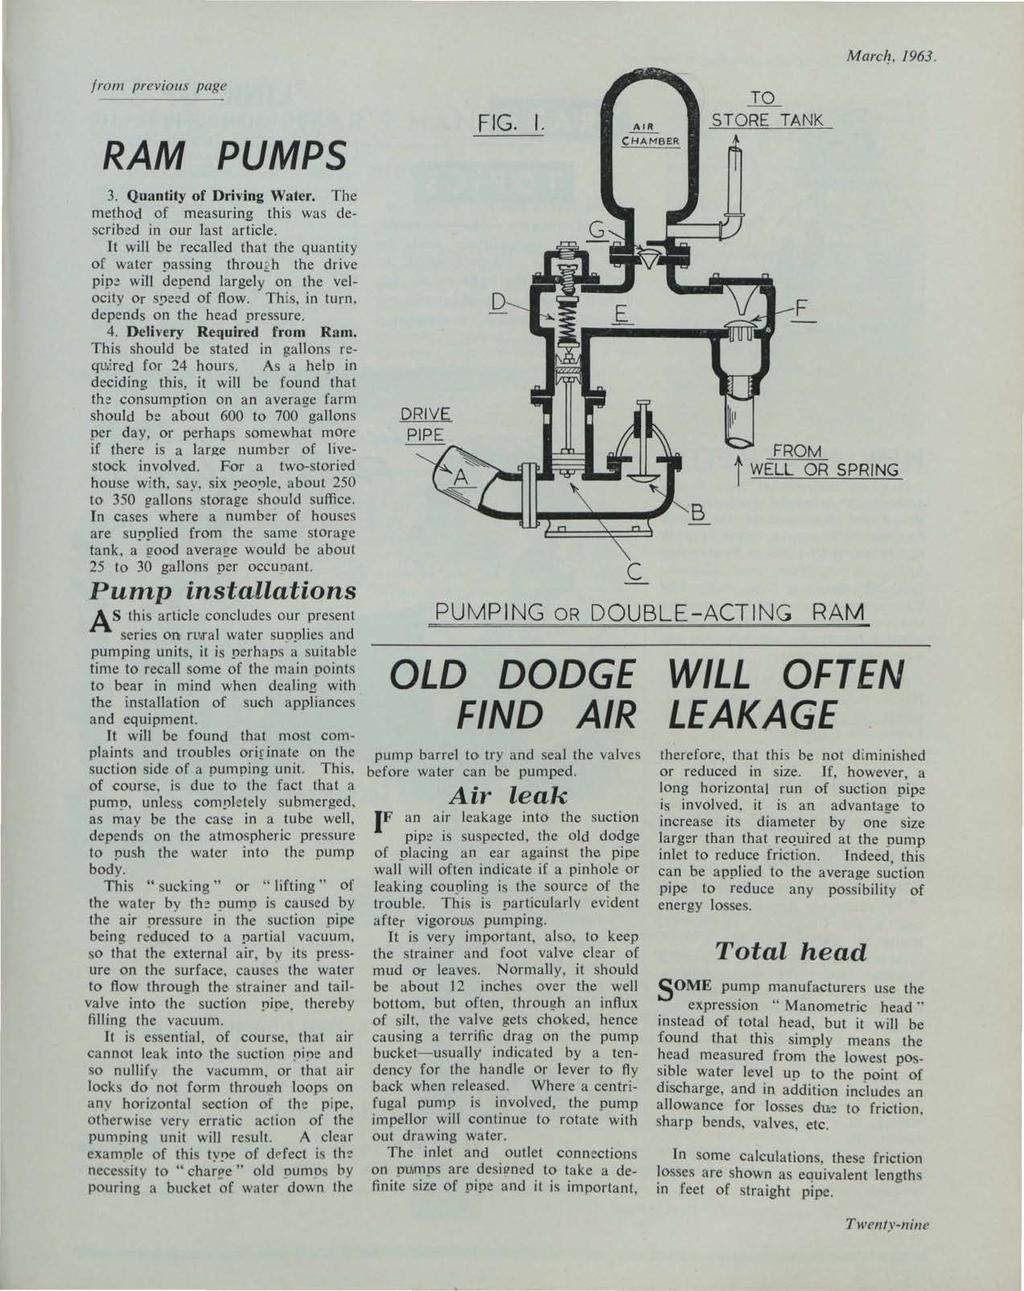 from previous page et al.: The Irish Plumber and Heating Contractor, March 1963 (complete is Marc!!. 1963. RAM PUMPS 3. Quantity of Driving Water.